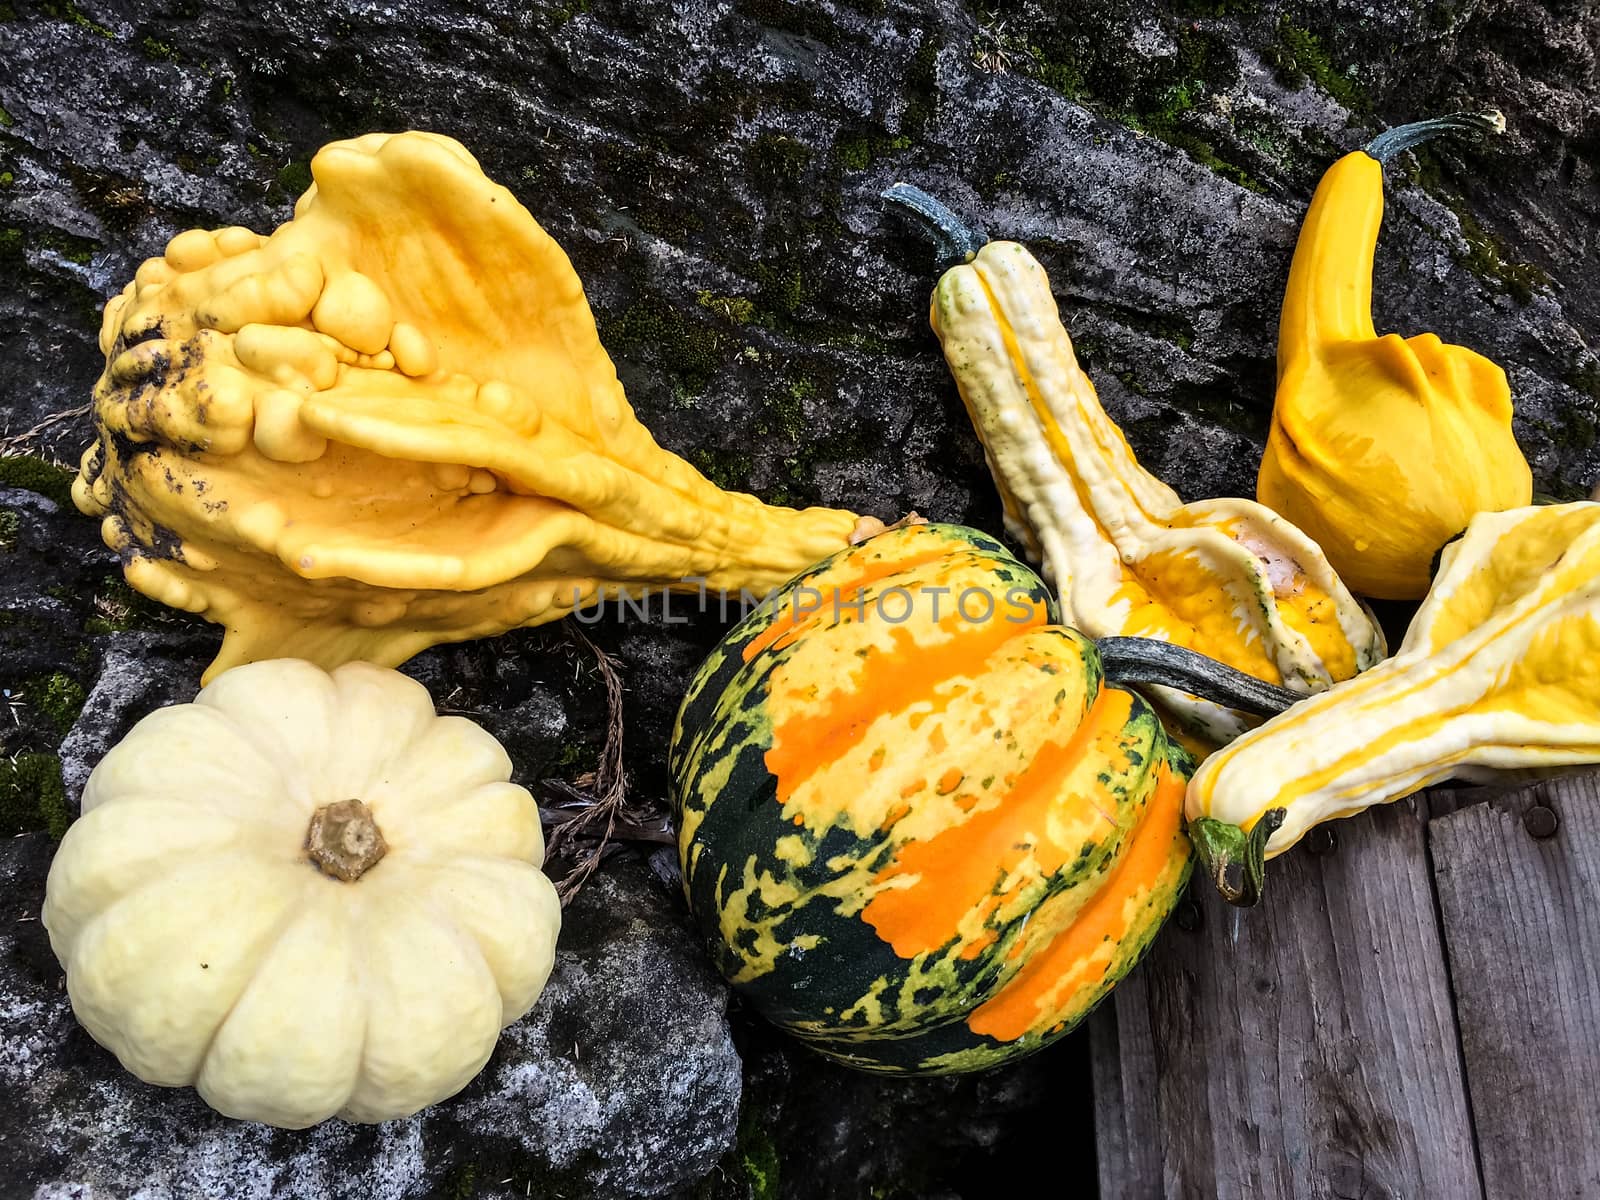 Colorful autumn vegetables. Variety of gourds and pumpkins.